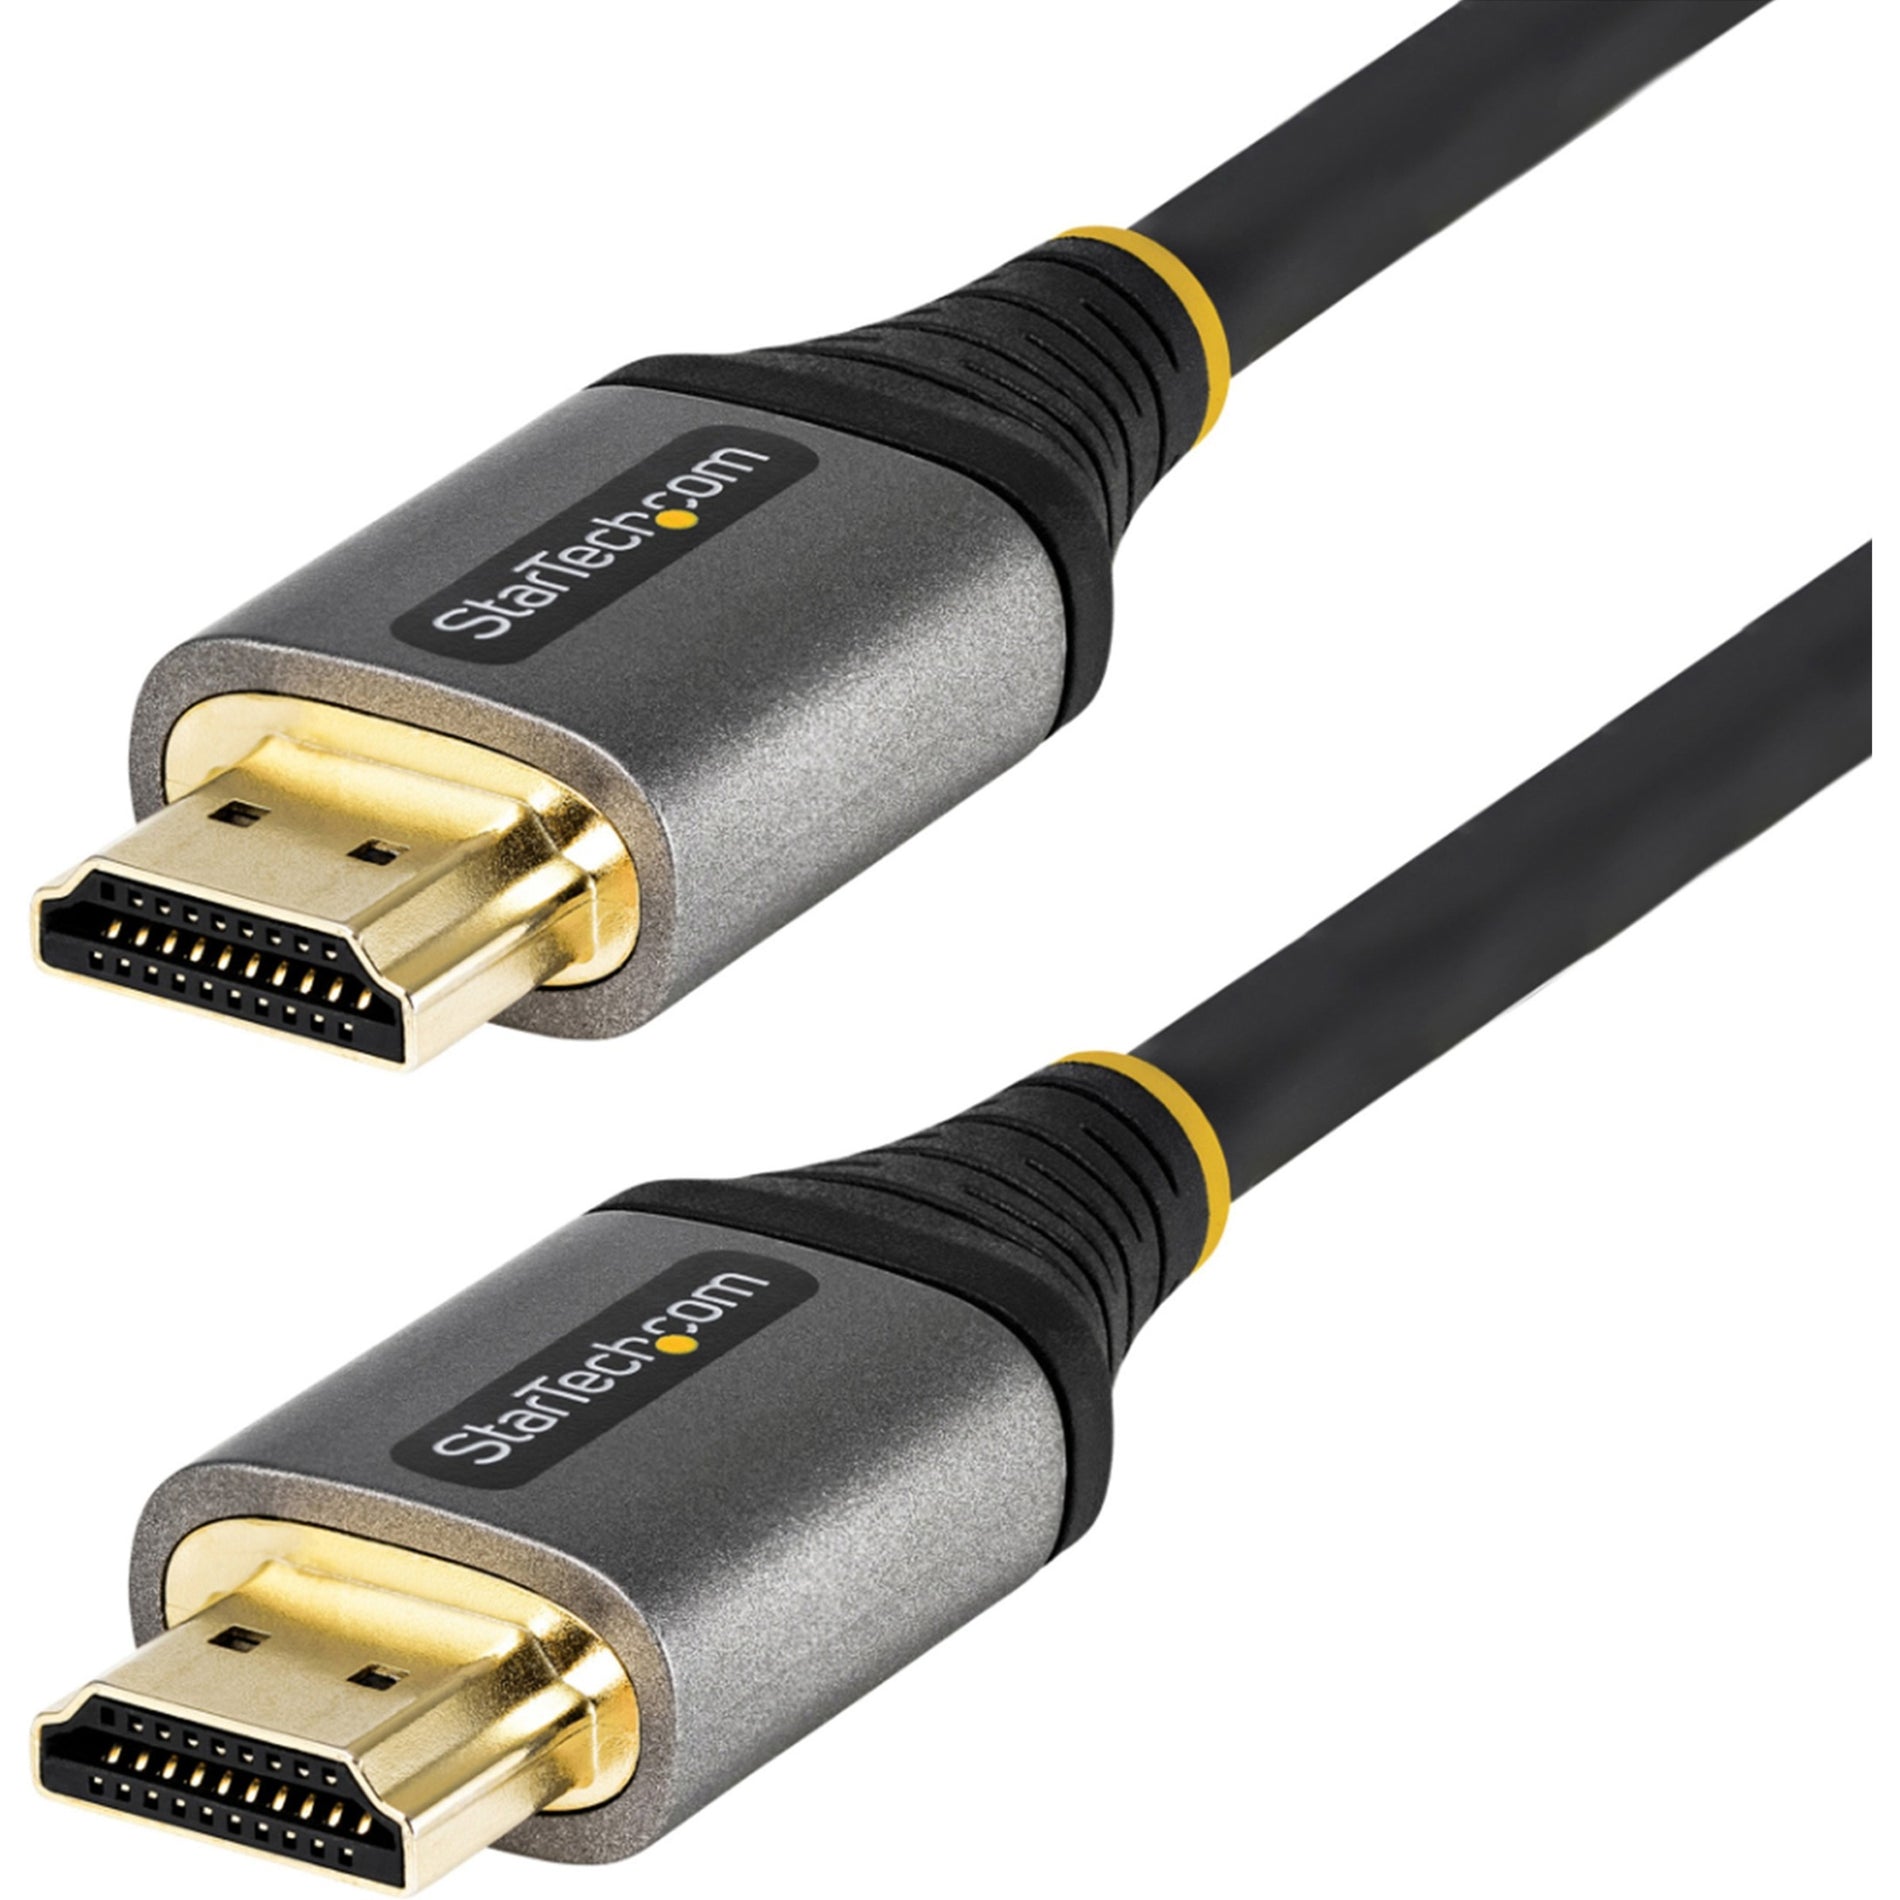 StarTech.com HDMMV1M Premium Certified HDMI 2.0 Cable, High Speed Ultra HD 4K 60Hz HDMI Cable with Ethernet, HDR10, UHD HDMI Monitor Cord